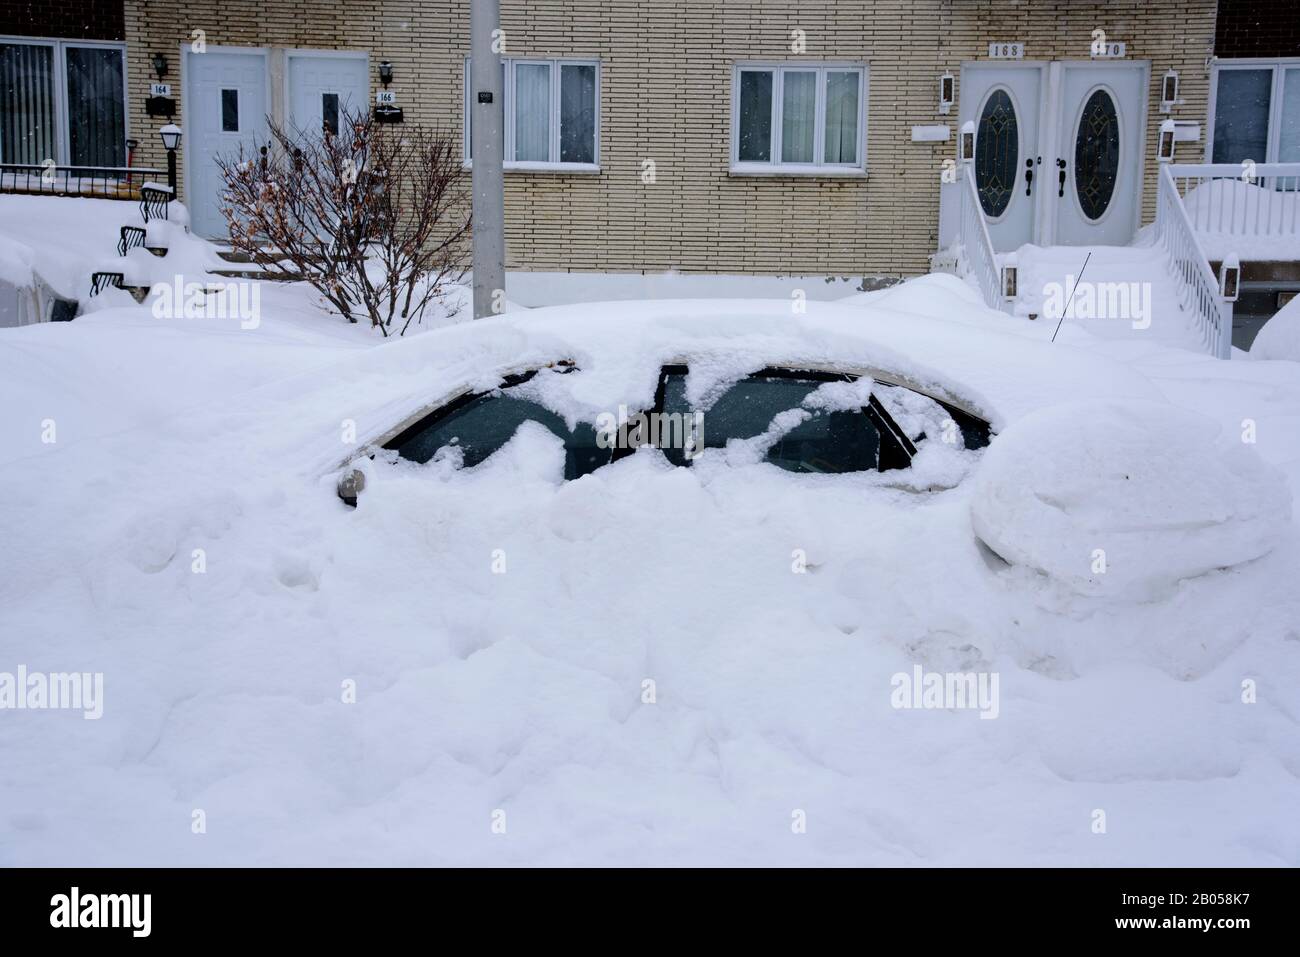 Car buried in snow after a storm, province of Quebec, Canada. Stock Photo